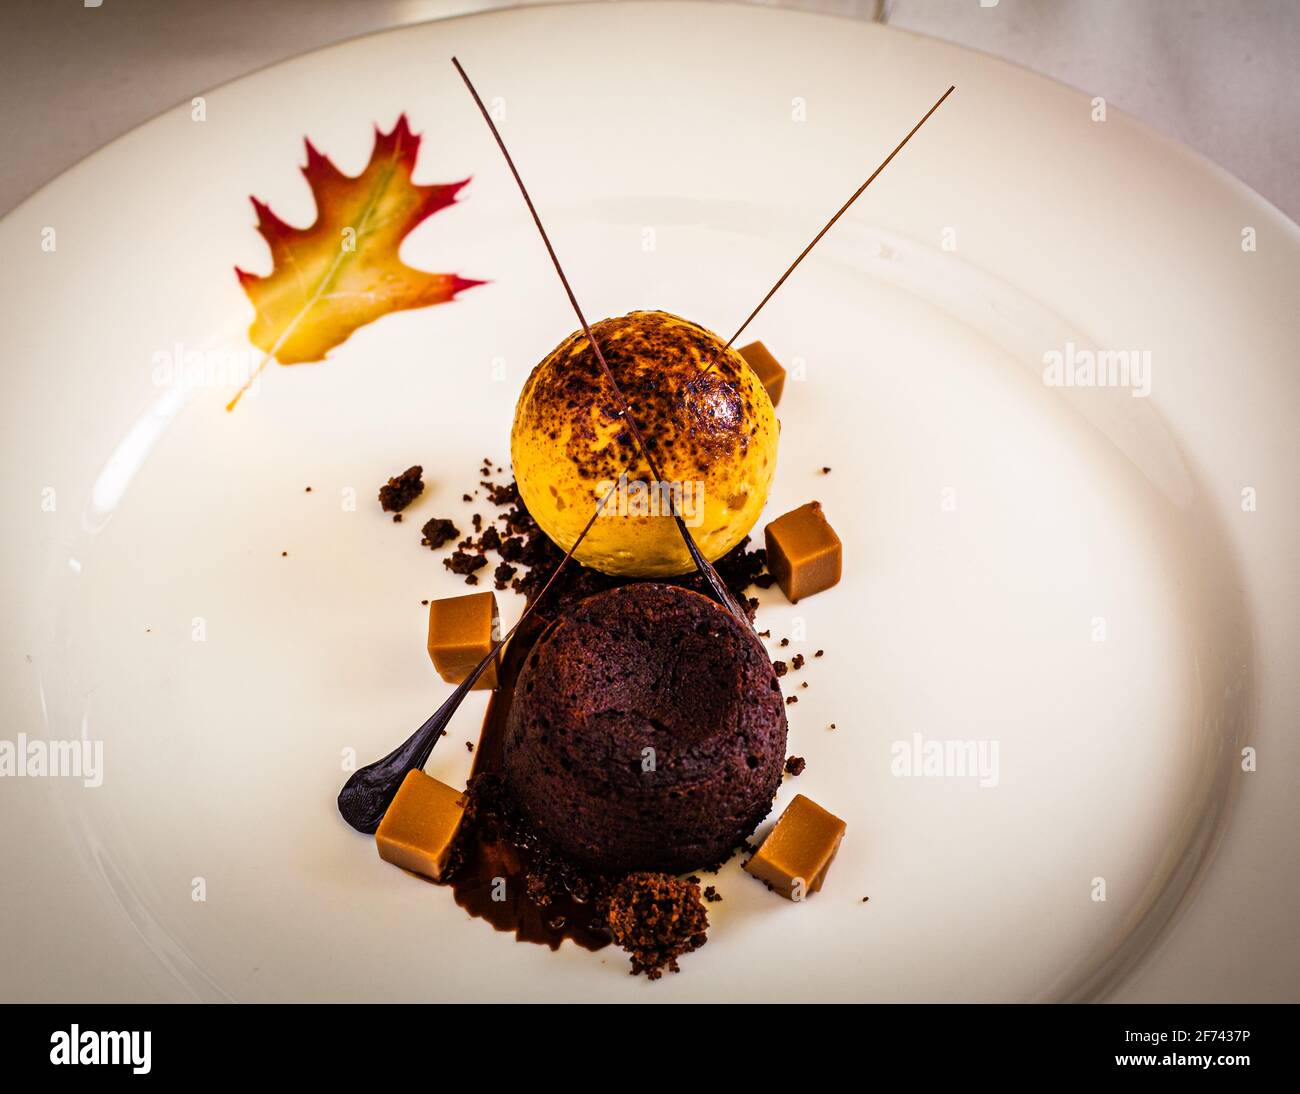 The peanut parfait with chocolate muffin, chocolate sprinkles and roasted peanut pieces has varied textures Stock Photo